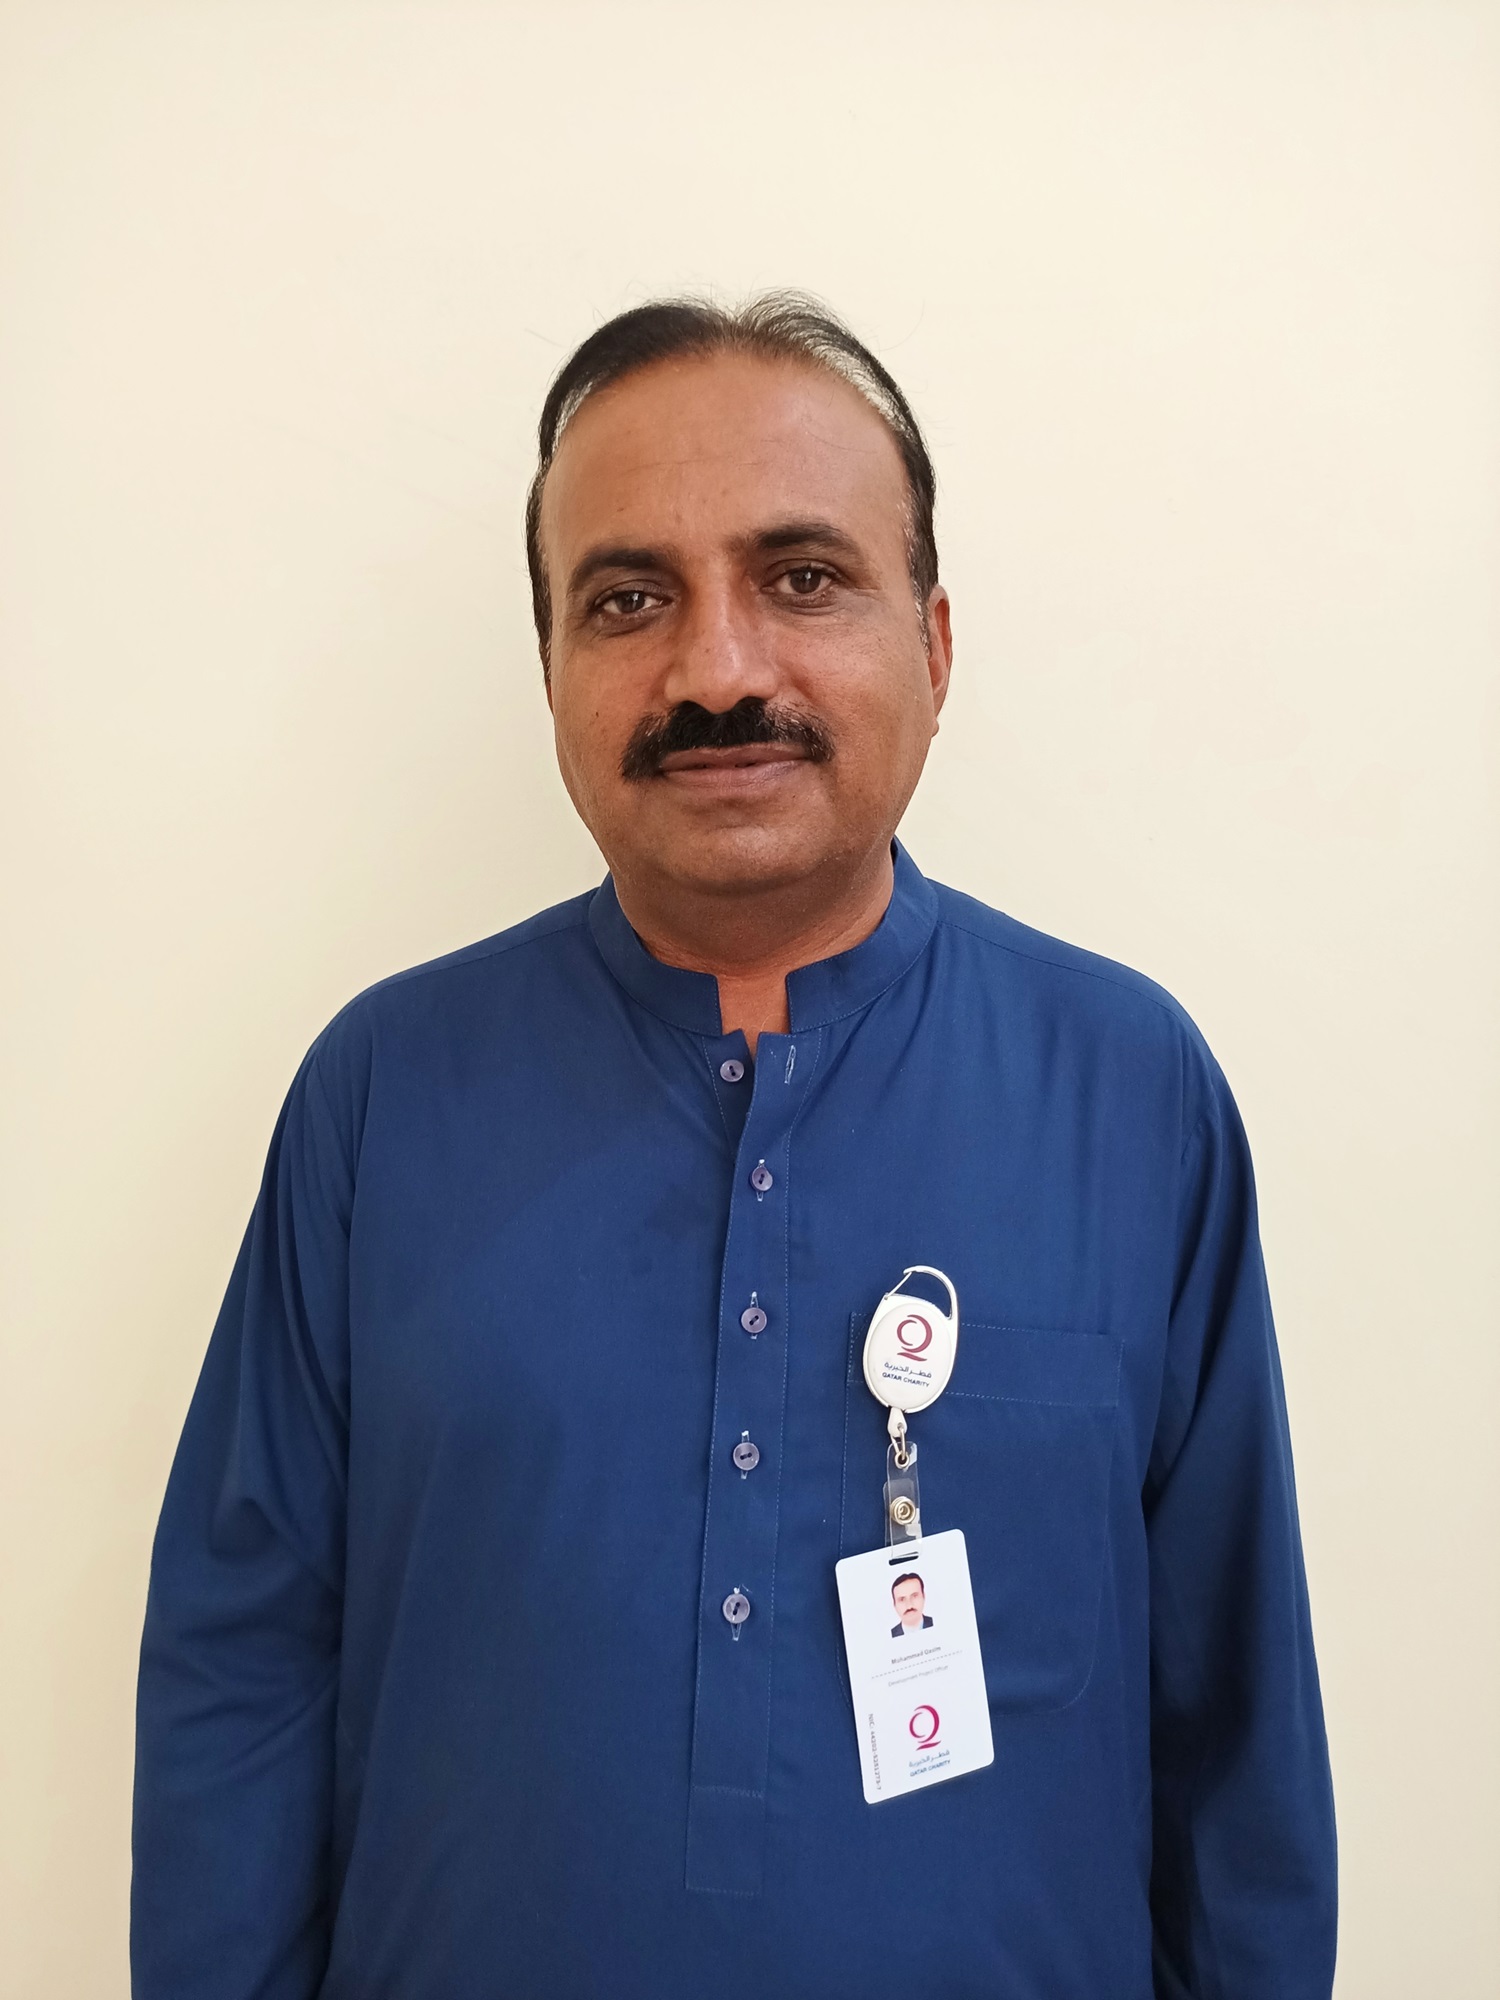 Mohammad Qasim, project manager and team leader at Qatar Charity's office in Khairpur - Pakistan